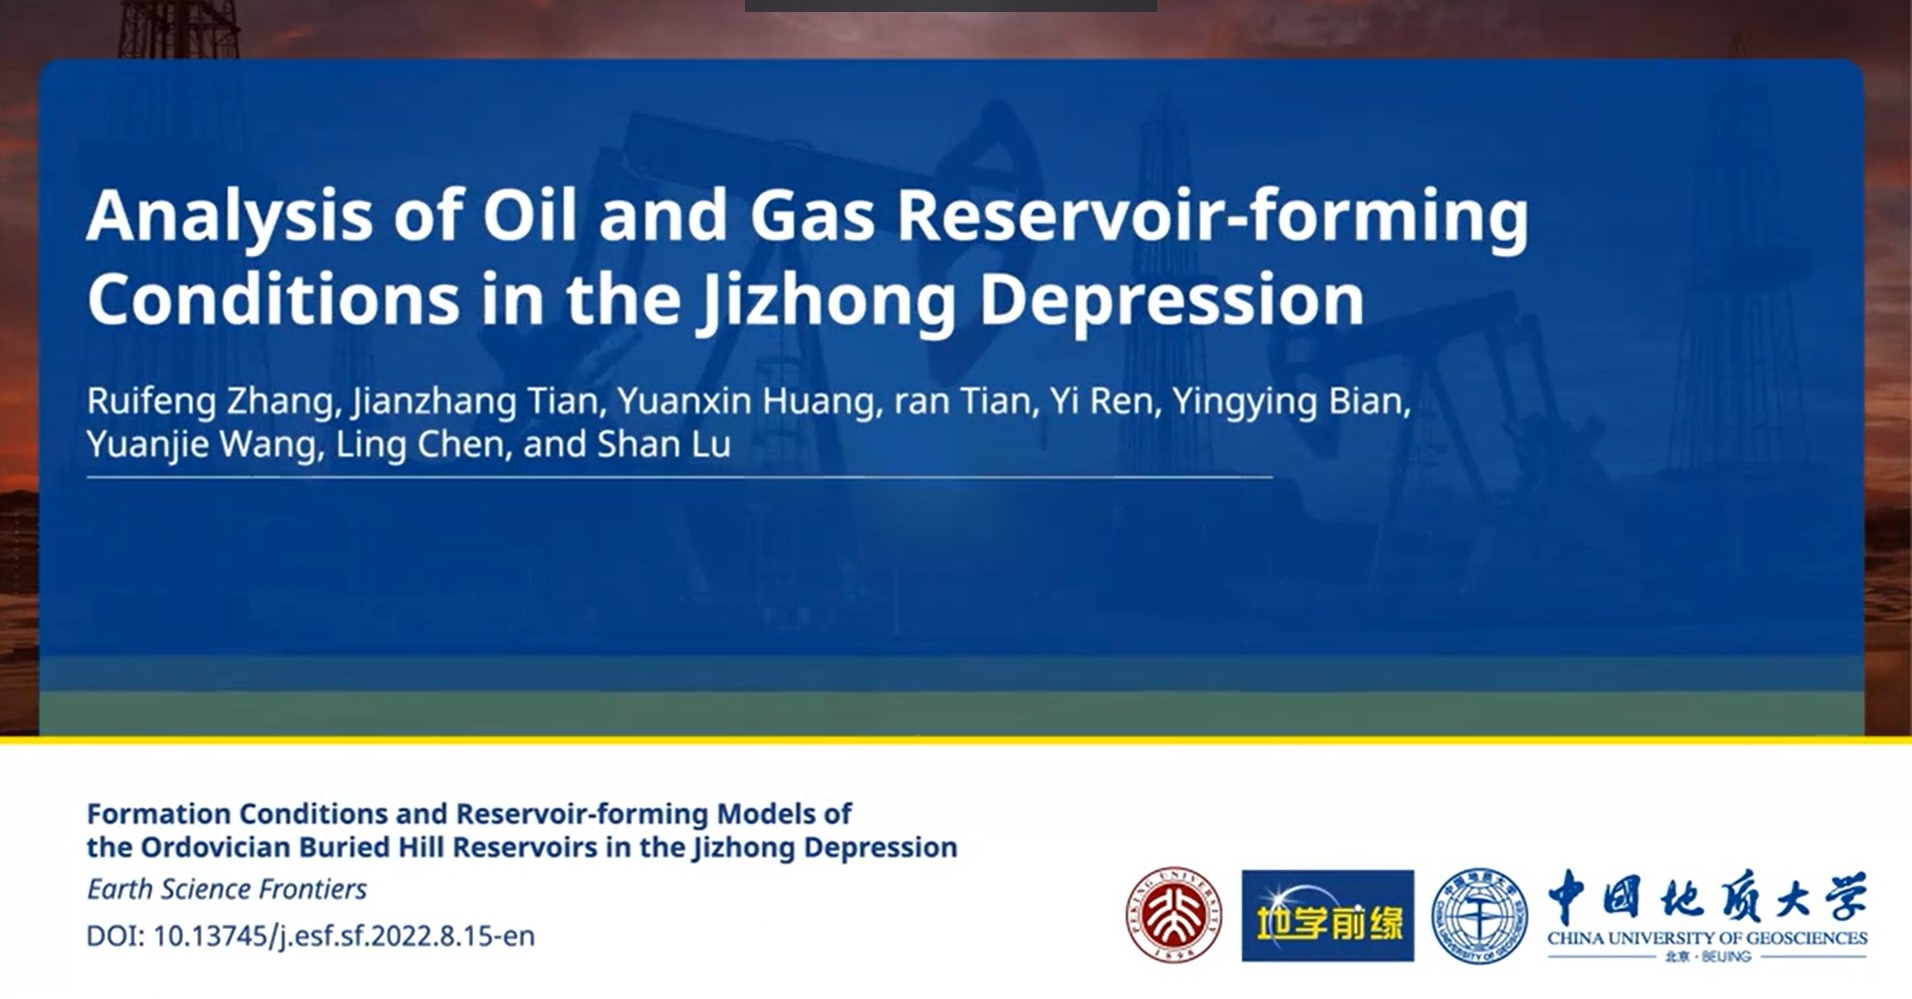 New Study in Earth Science Frontiers Cracks Code for Future Exploration of Oil and Gas in the Jizhong Depression